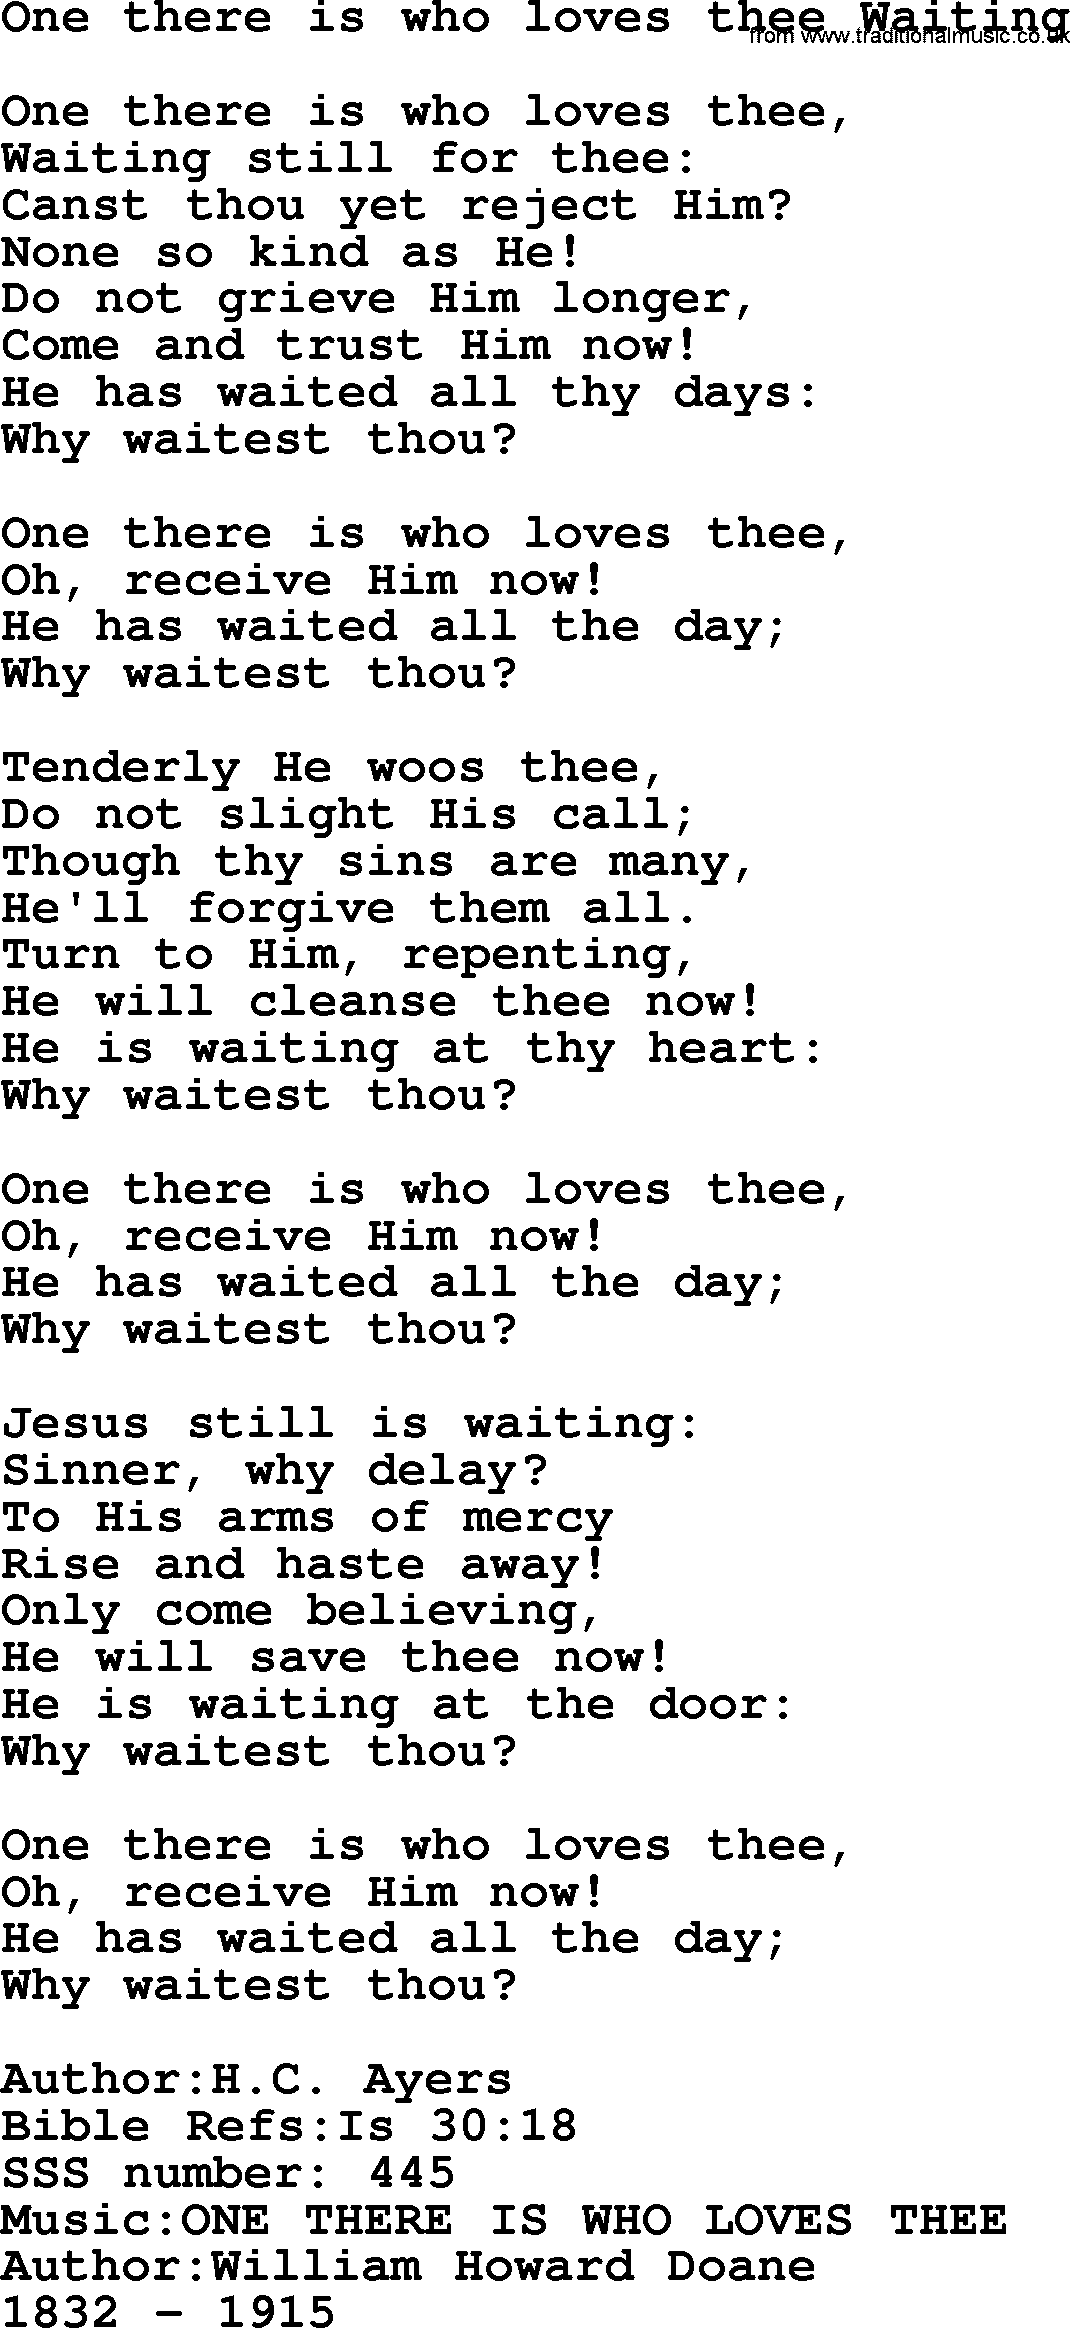 Sacred Songs and Solos complete, 1200 Hymns, title: One There Is Who Loves Thee Waiting, lyrics and PDF